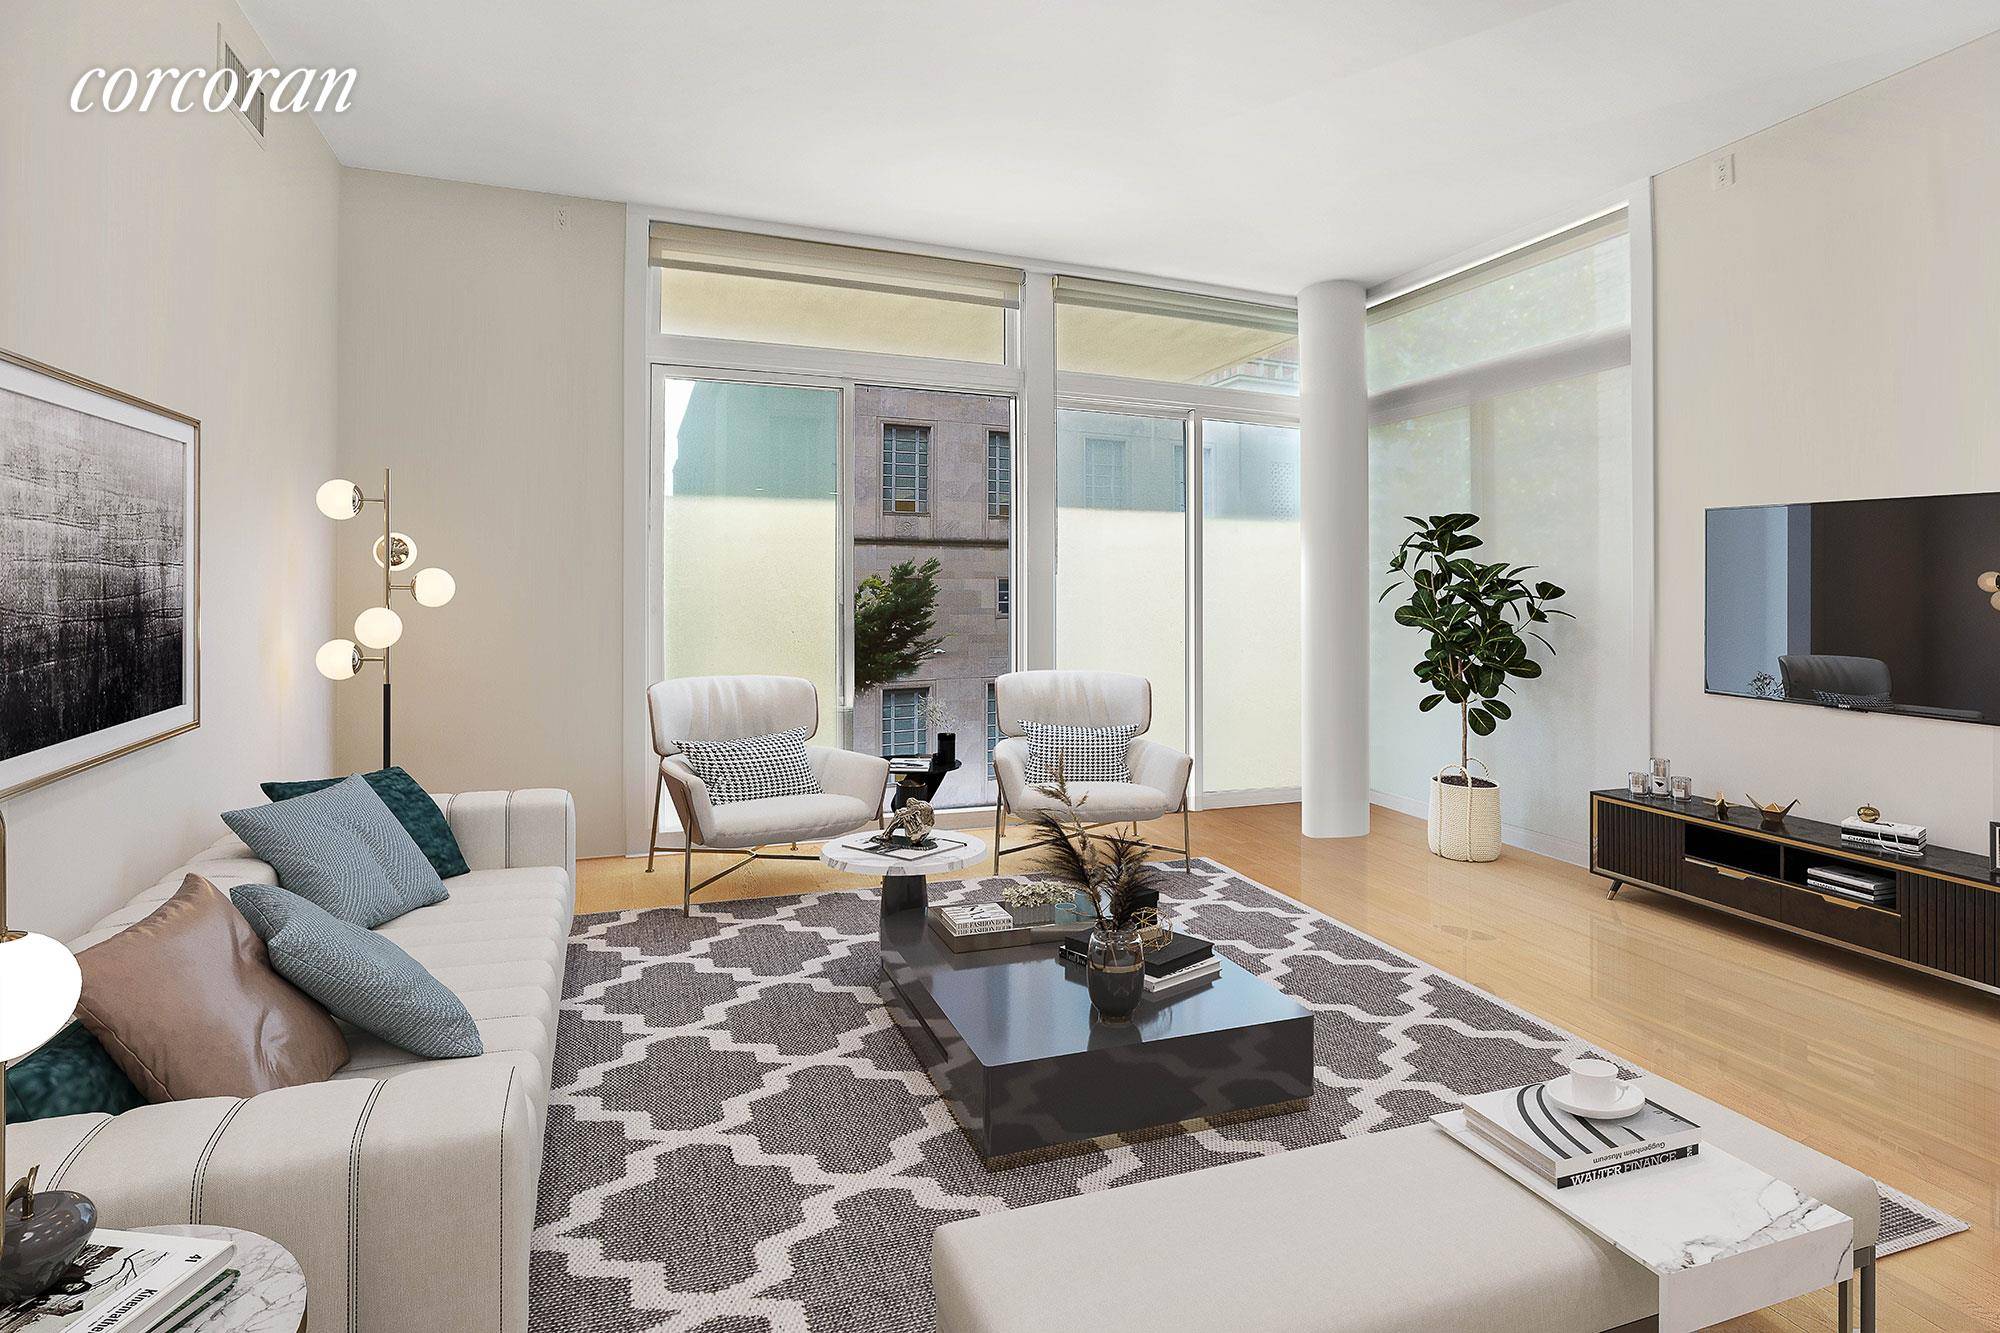 Residence 101 at 65 West End Avenue is a refined 1 bedroom, 1 bathroom Manhattan Beach condo which includes a deeded parking spot.